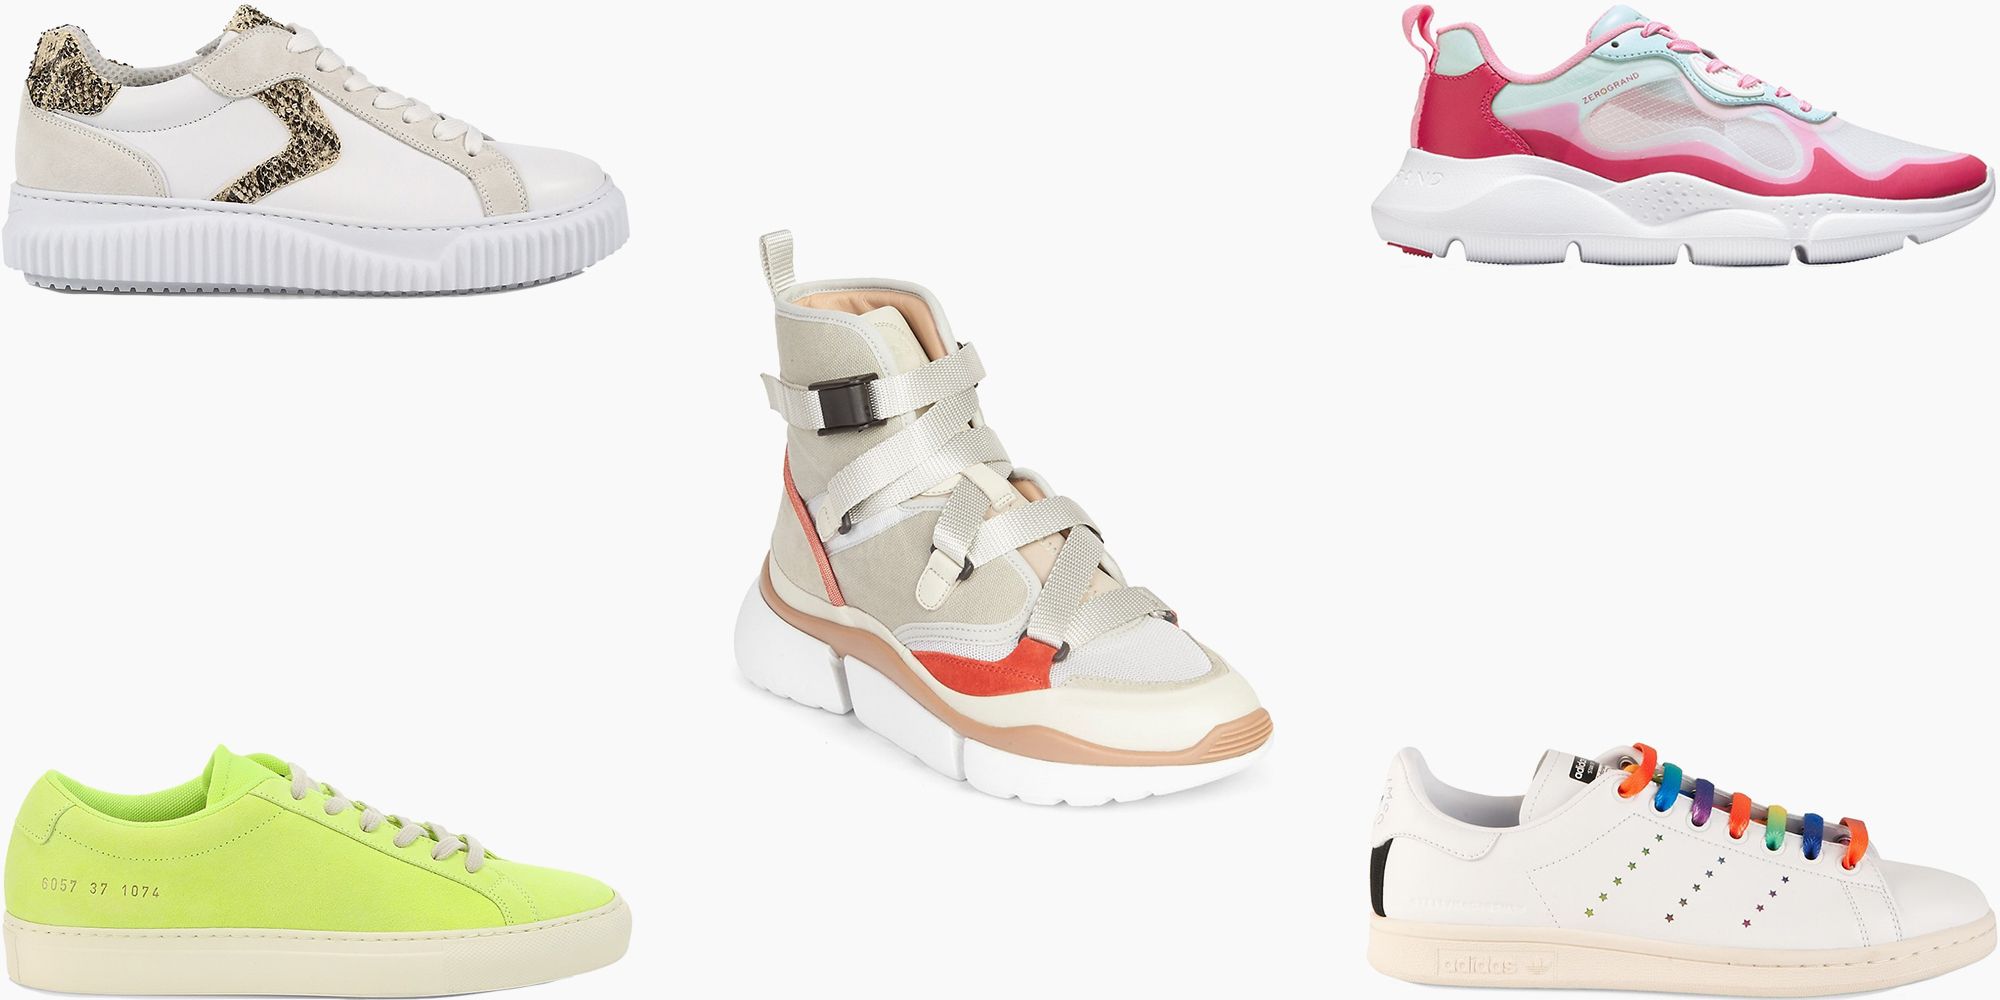 Chic Pairs of Sneakers Secretly Discounted At Avenue